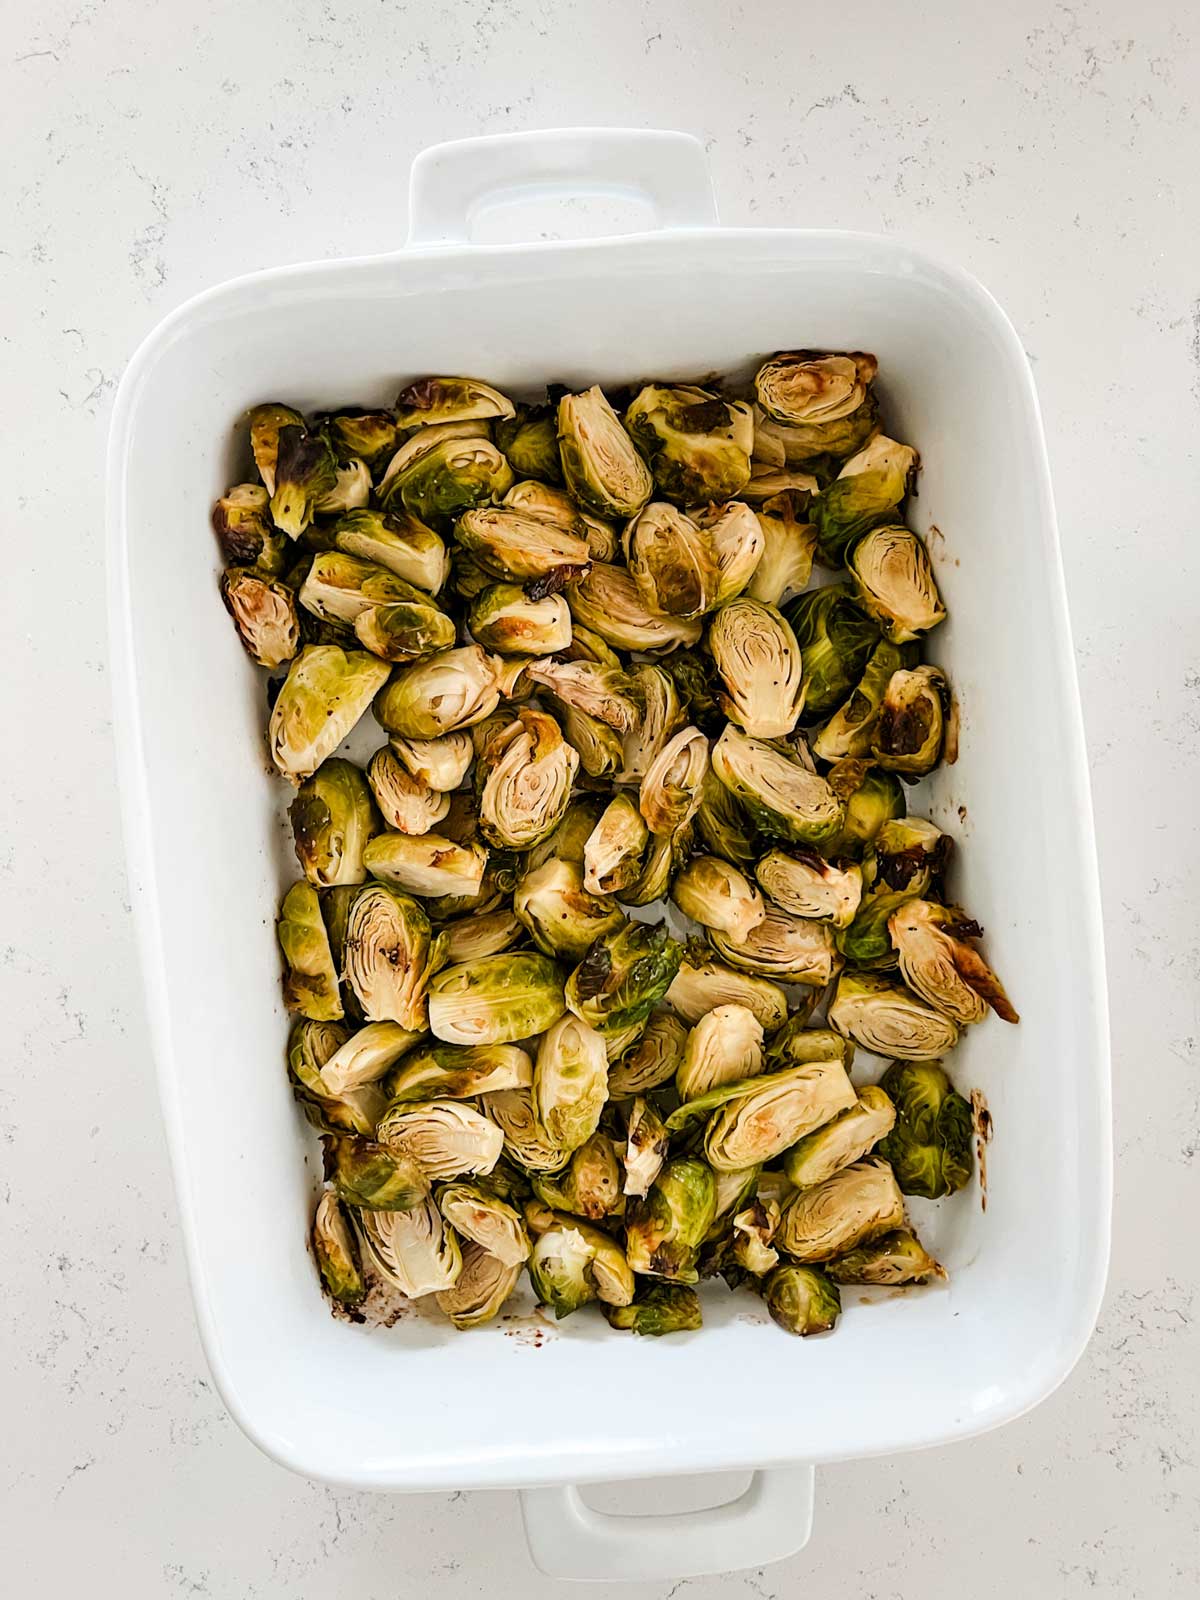 Overhead photo of brussels sprouts in a casserole dish.